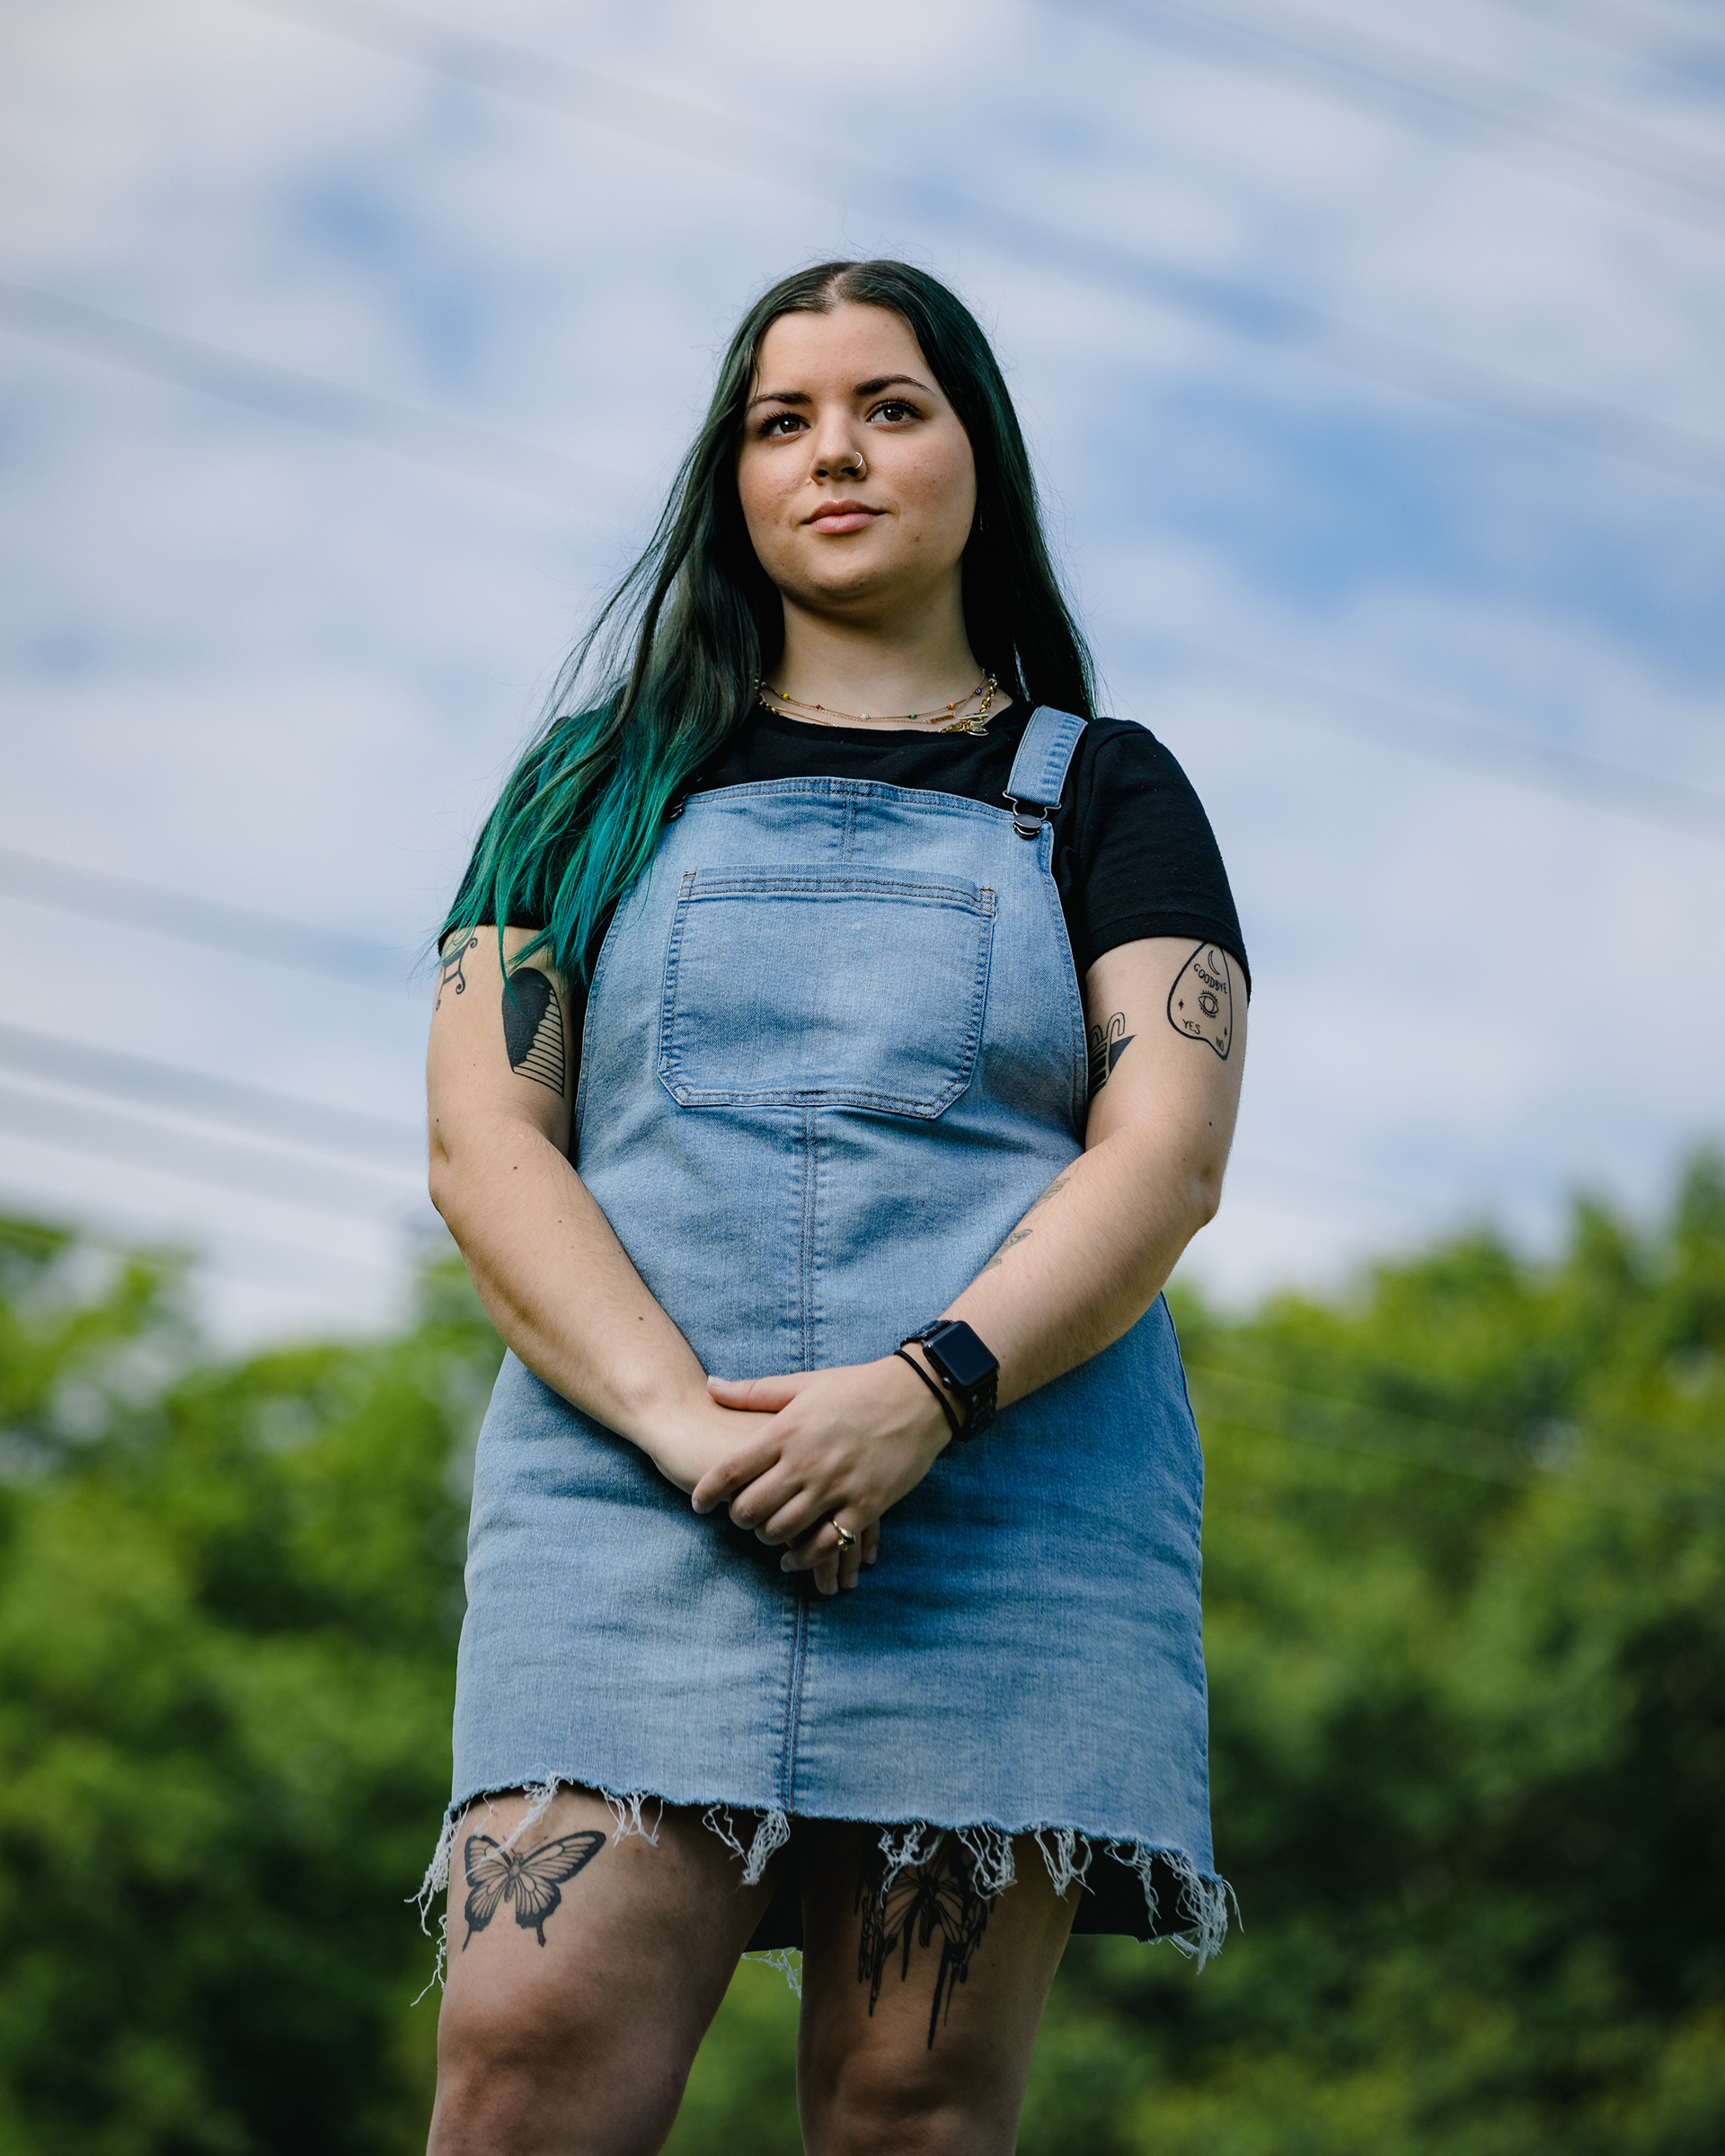 <strong>Sara Stark, 20</strong> Location: Atlanta. Used to earn $10 per hour working at Chipotle; now earns $12.70 per hour at Starbucks (Dustin Chambers for TIME)